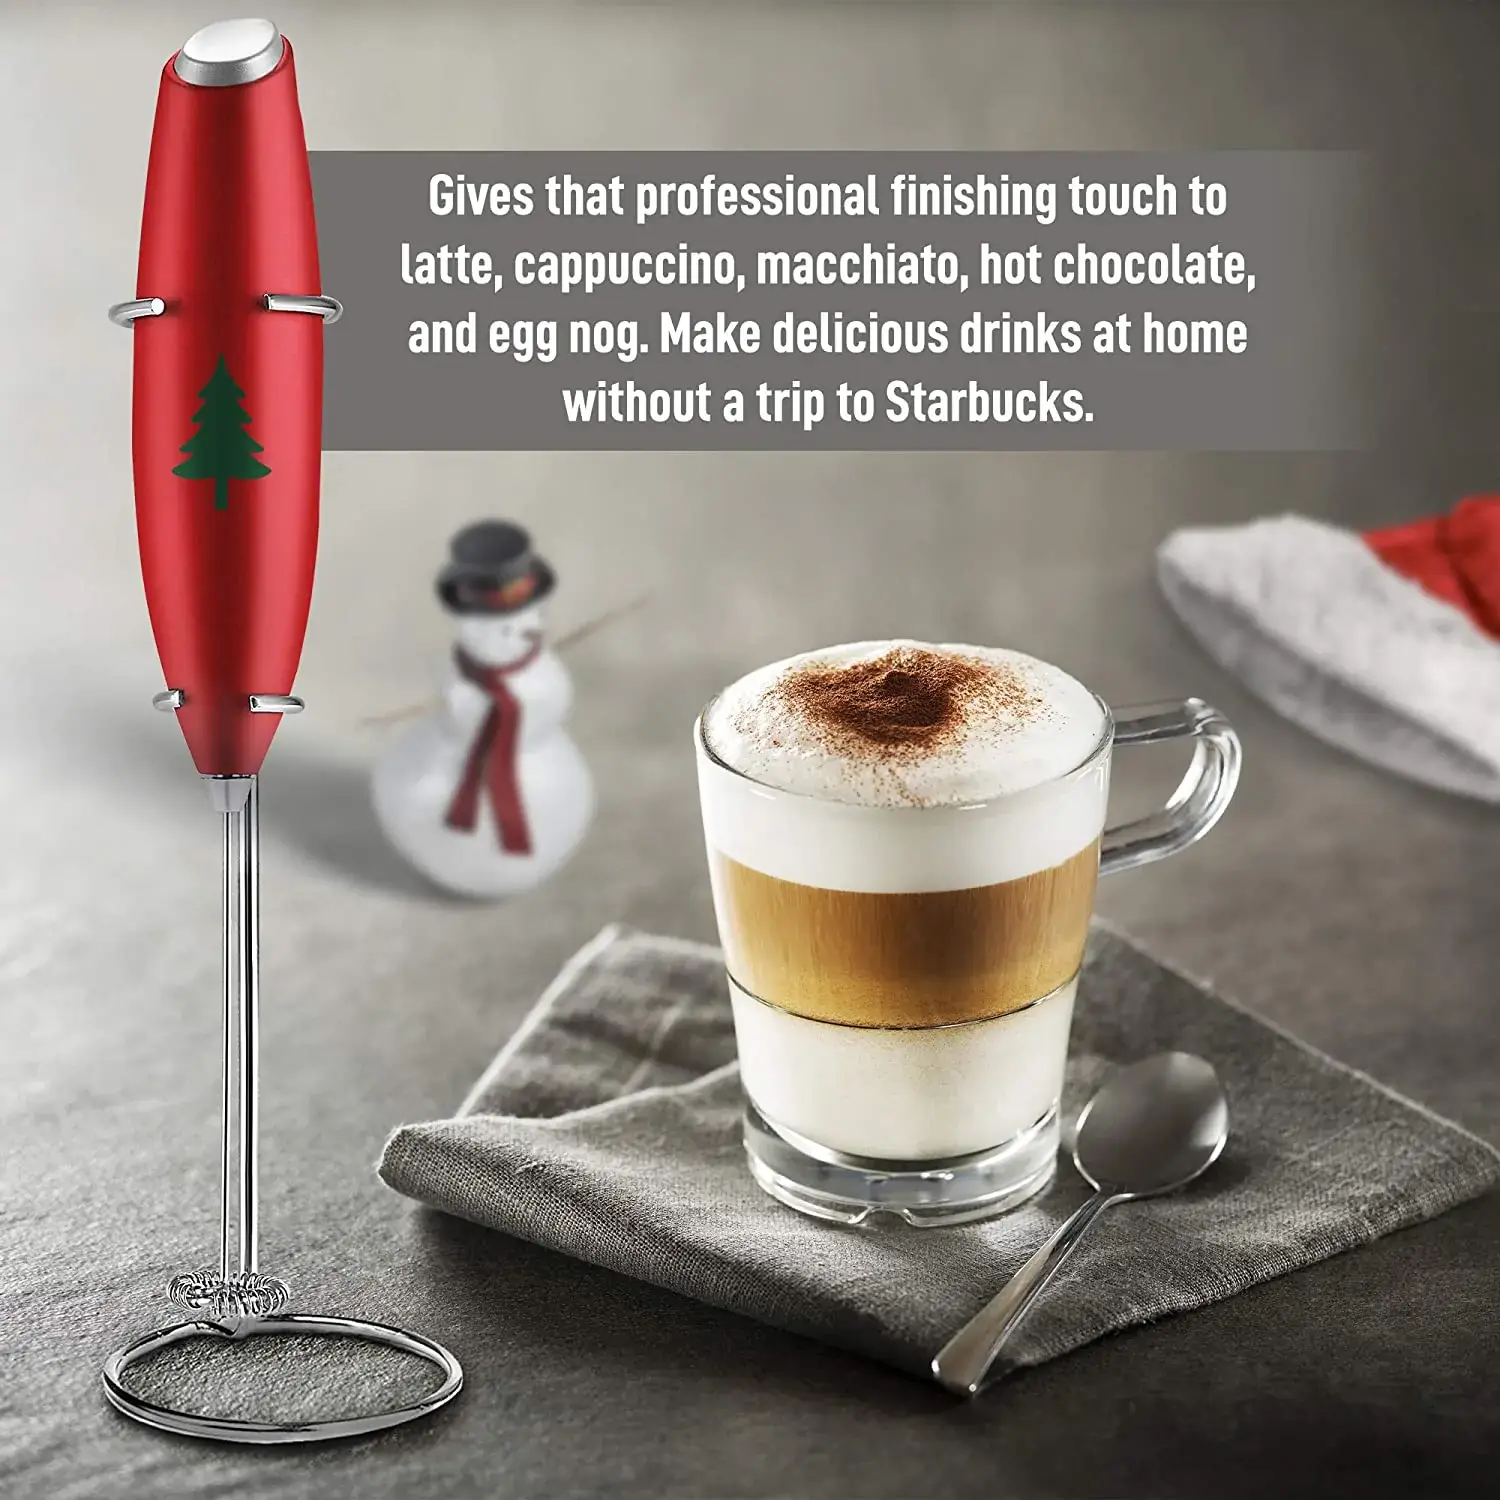 Milk Frother With Stand (Christmas Edition)